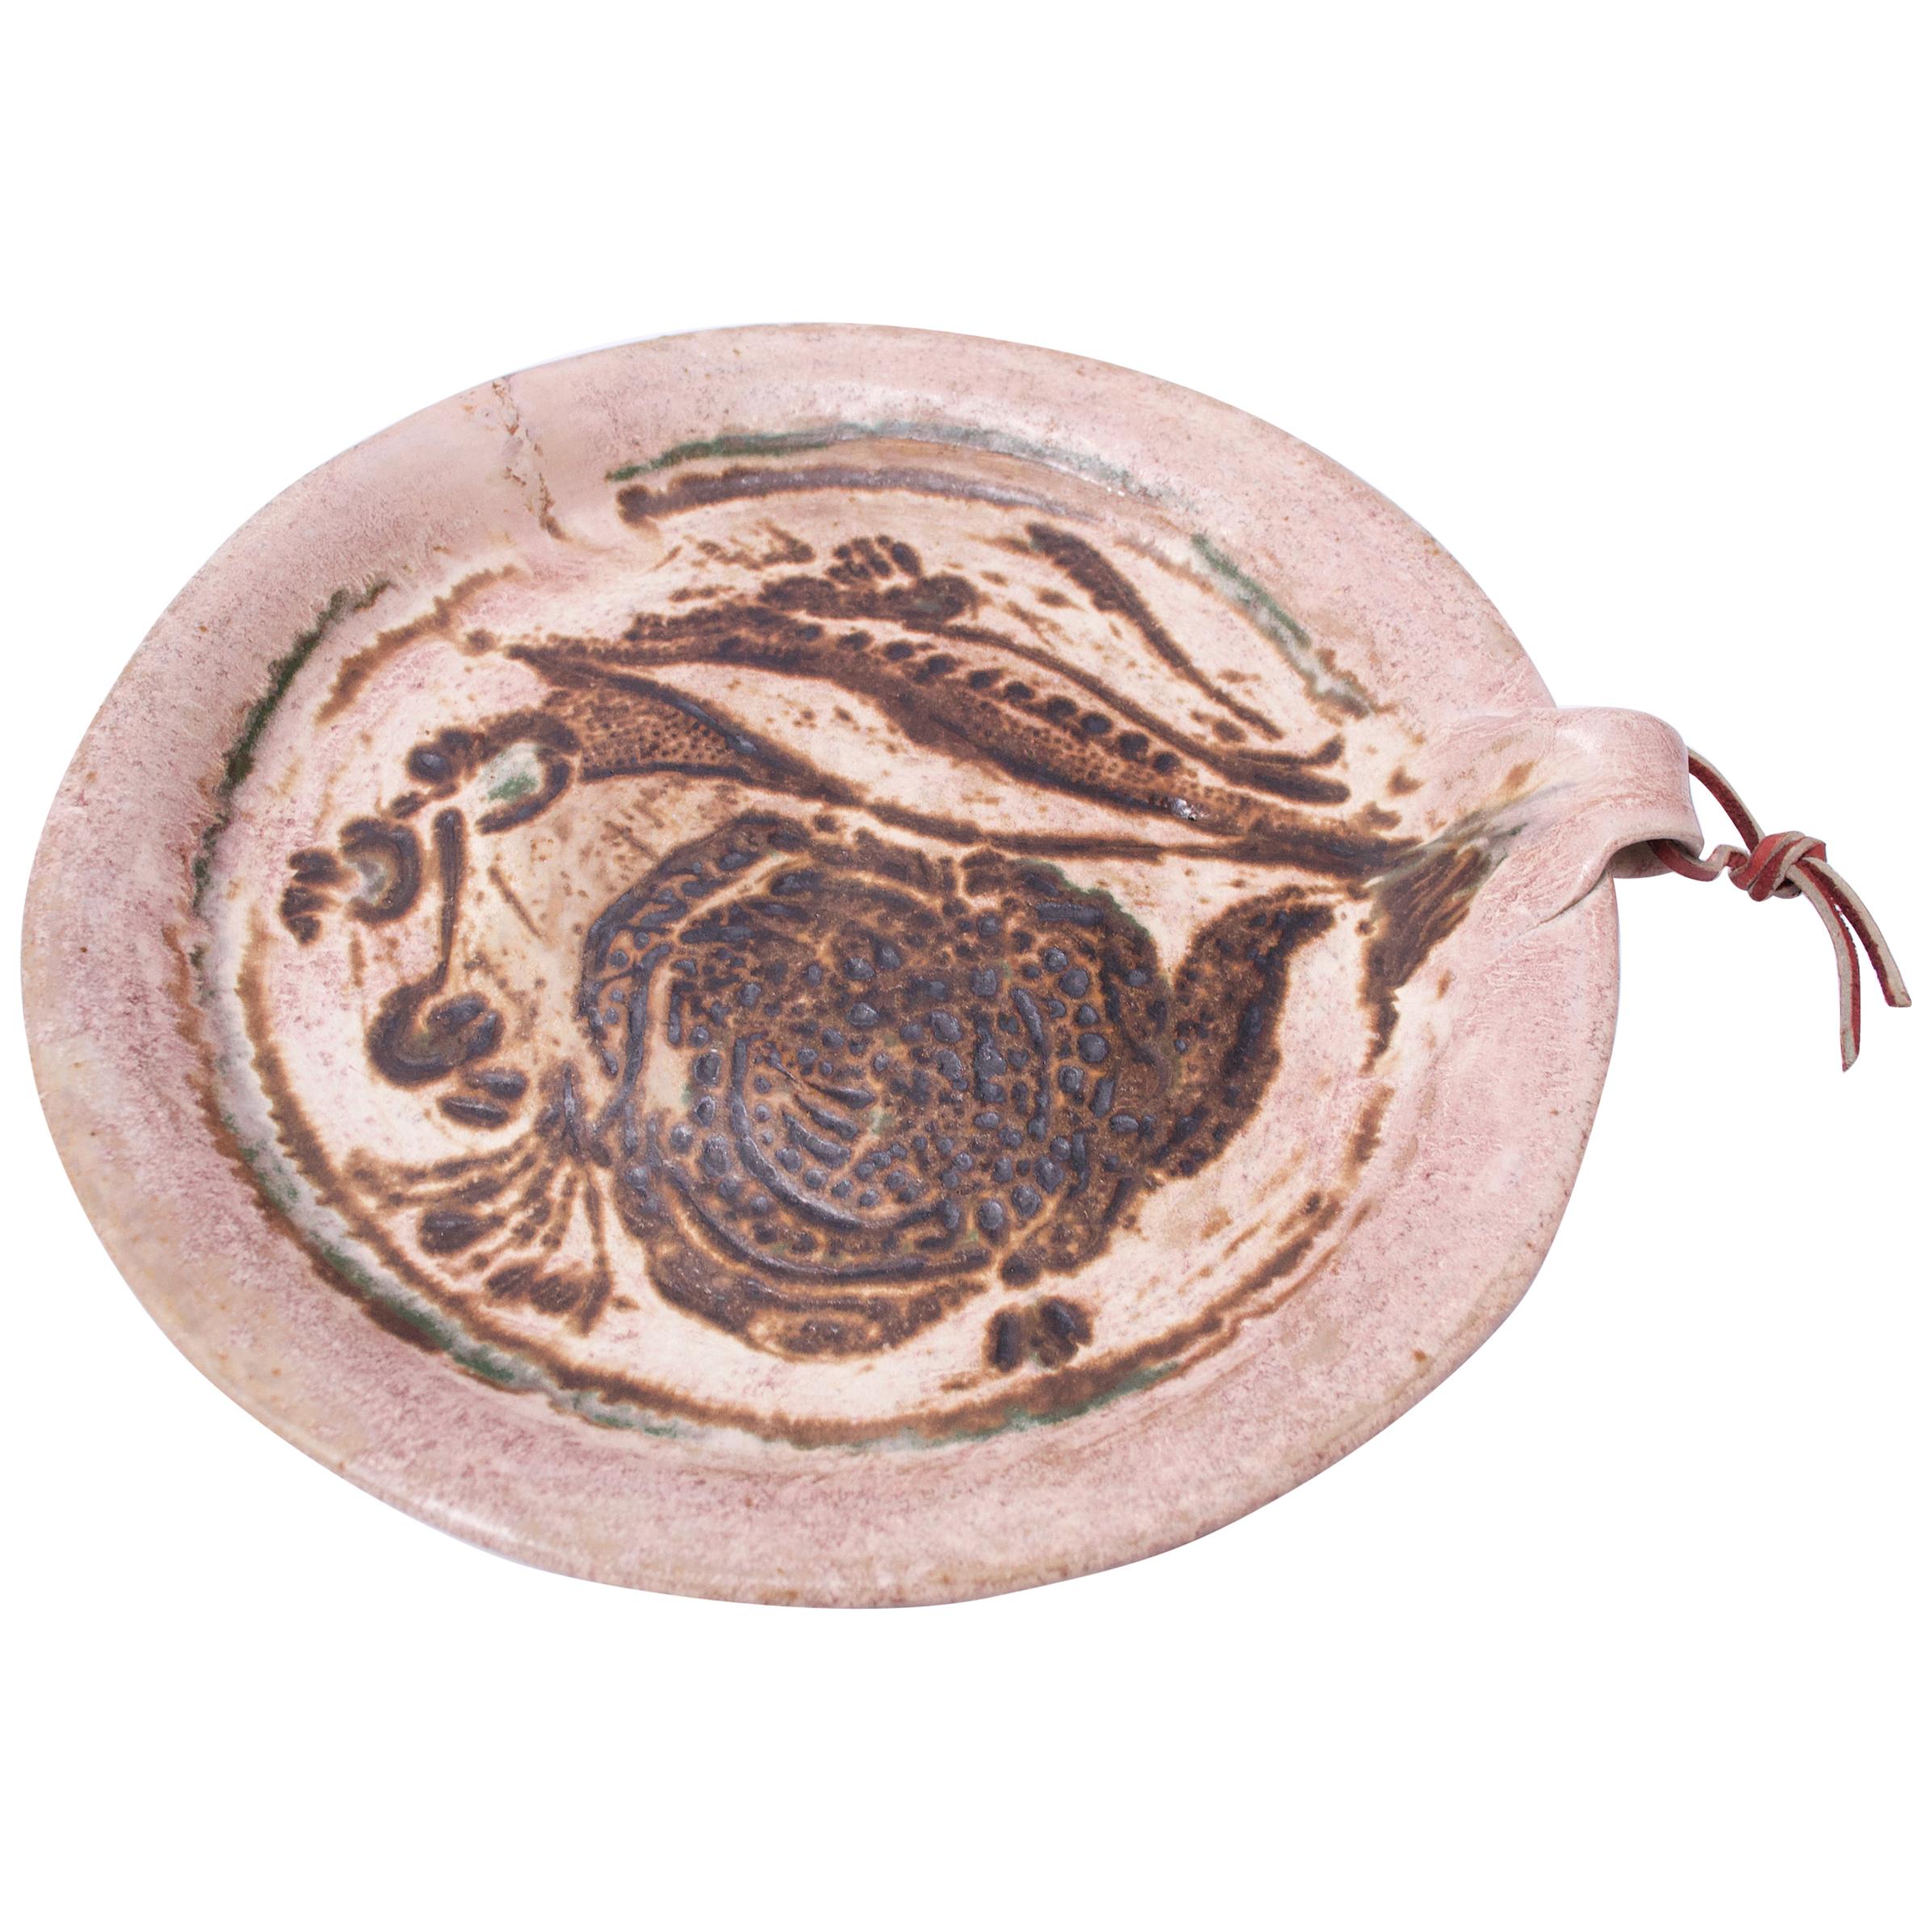 Pale Pink and Brown Stoneware Charger Signed Polk, 1972